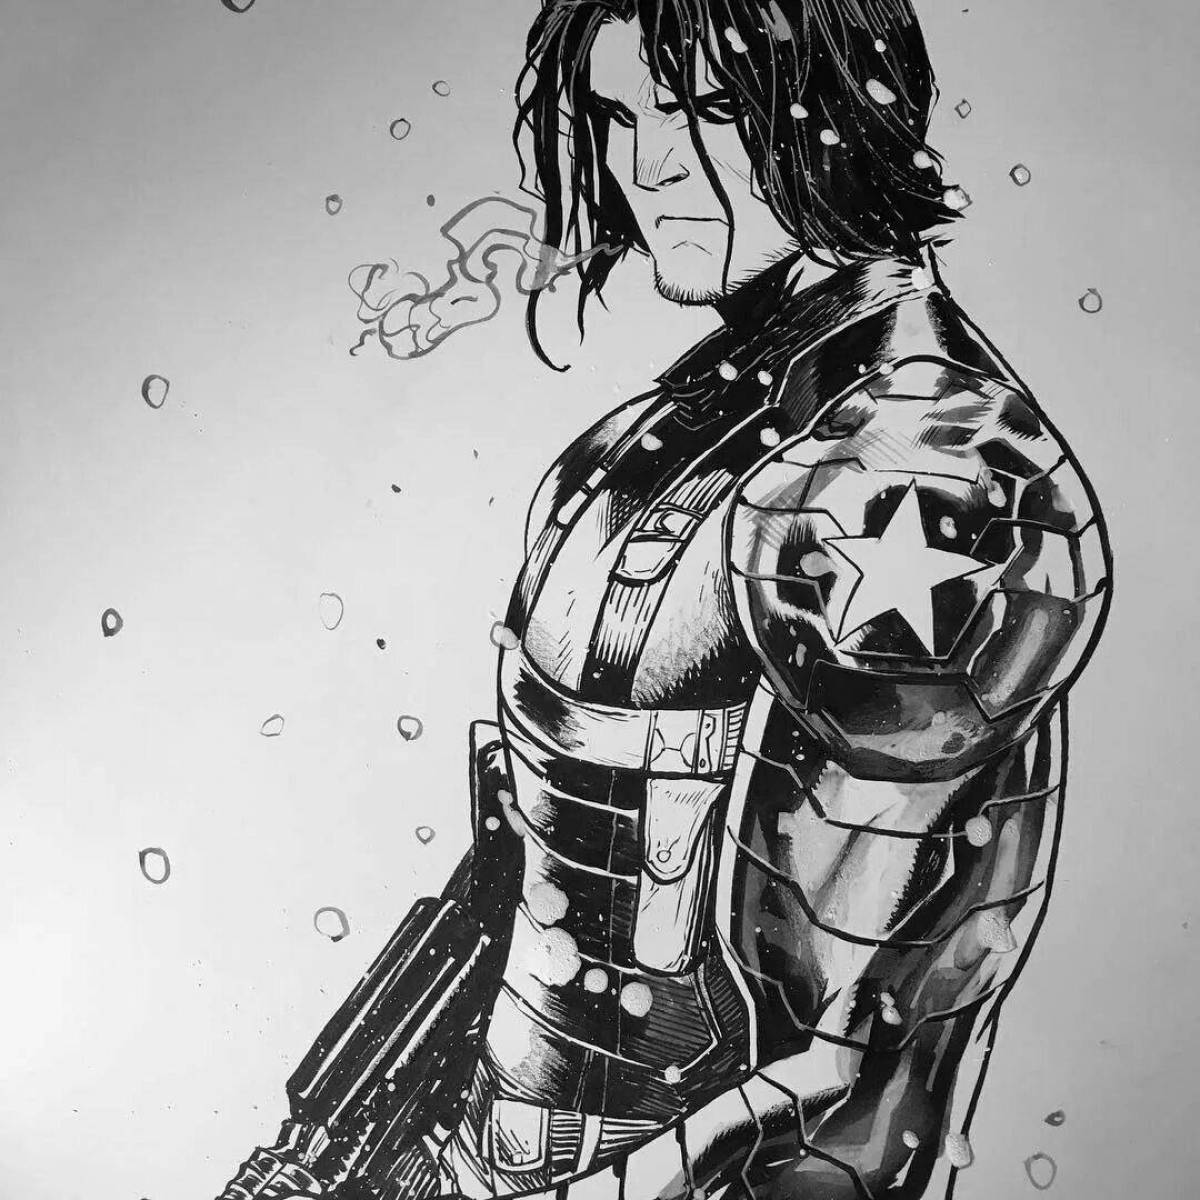 Bucky Barnes' exciting coloring book